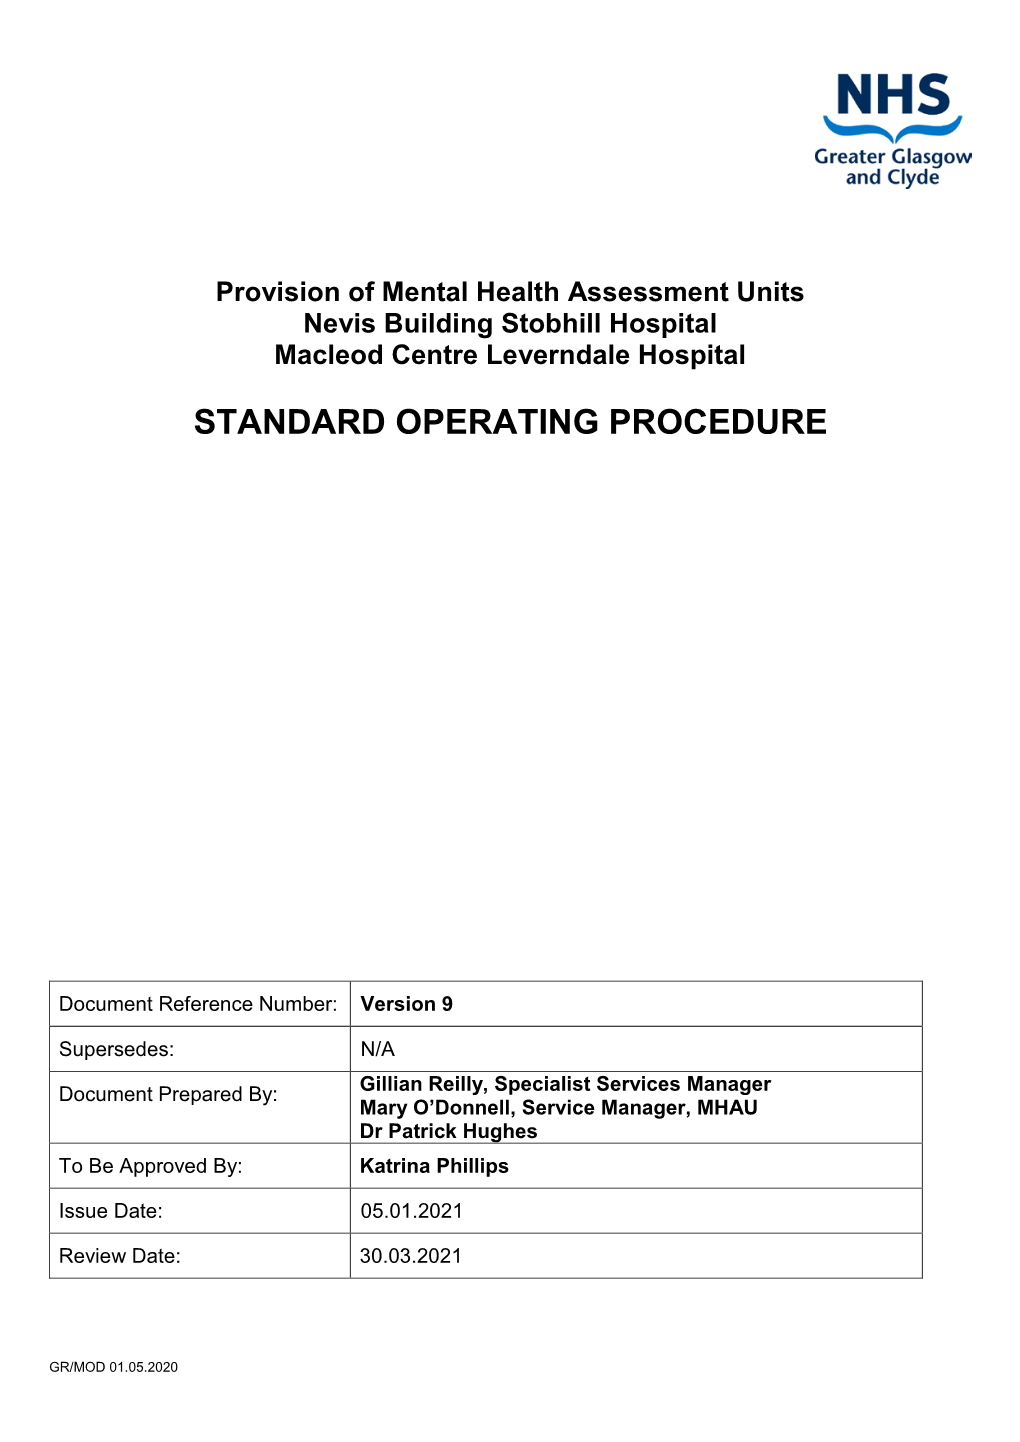 Provision of Mental Health Assessment Units Nevis Building Stobhill Hospital Macleod Centre Leverndale Hospital